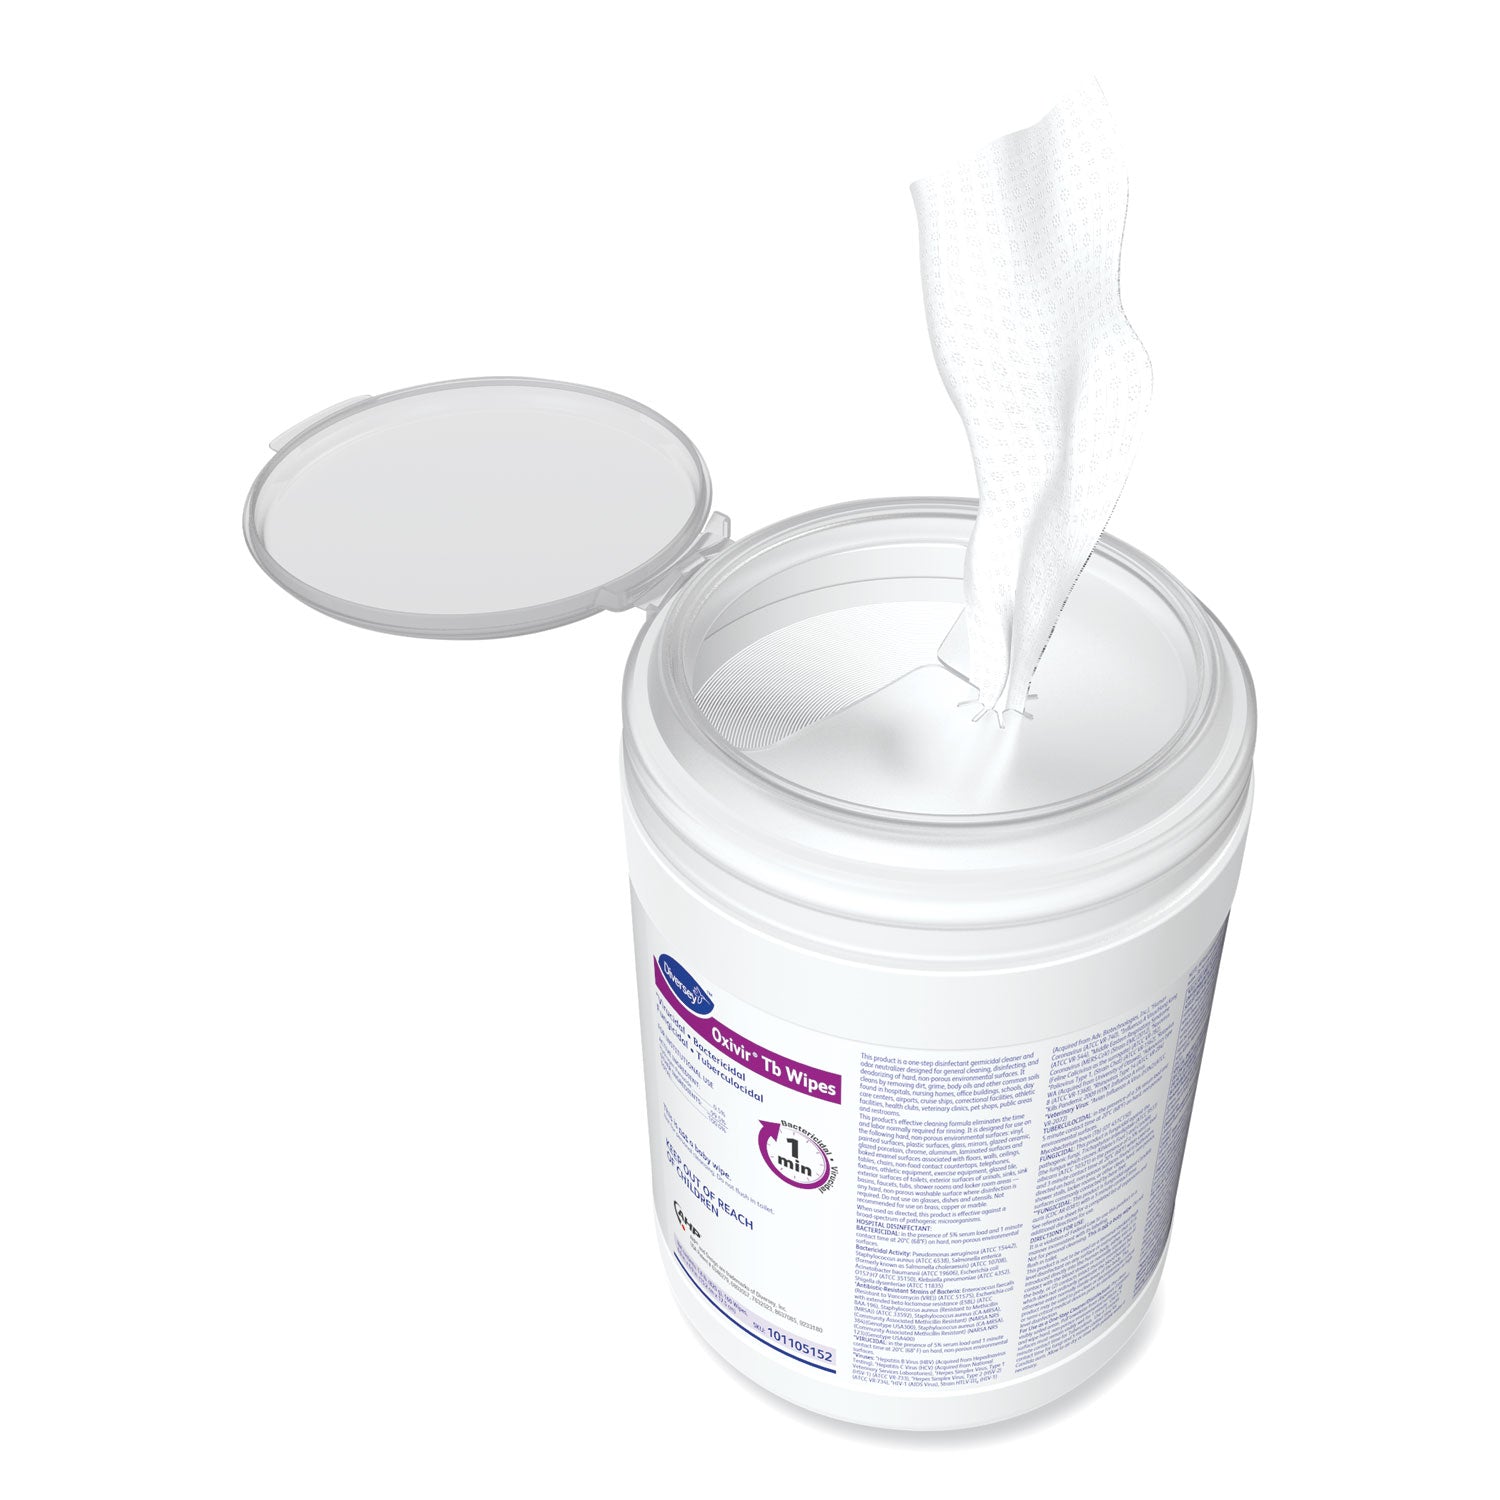 oxivir-tb-disinfectant-wipes-6-x-69-characteristic-scent-white-160-canister-4-canisters-carton_dvo101105152 - 7